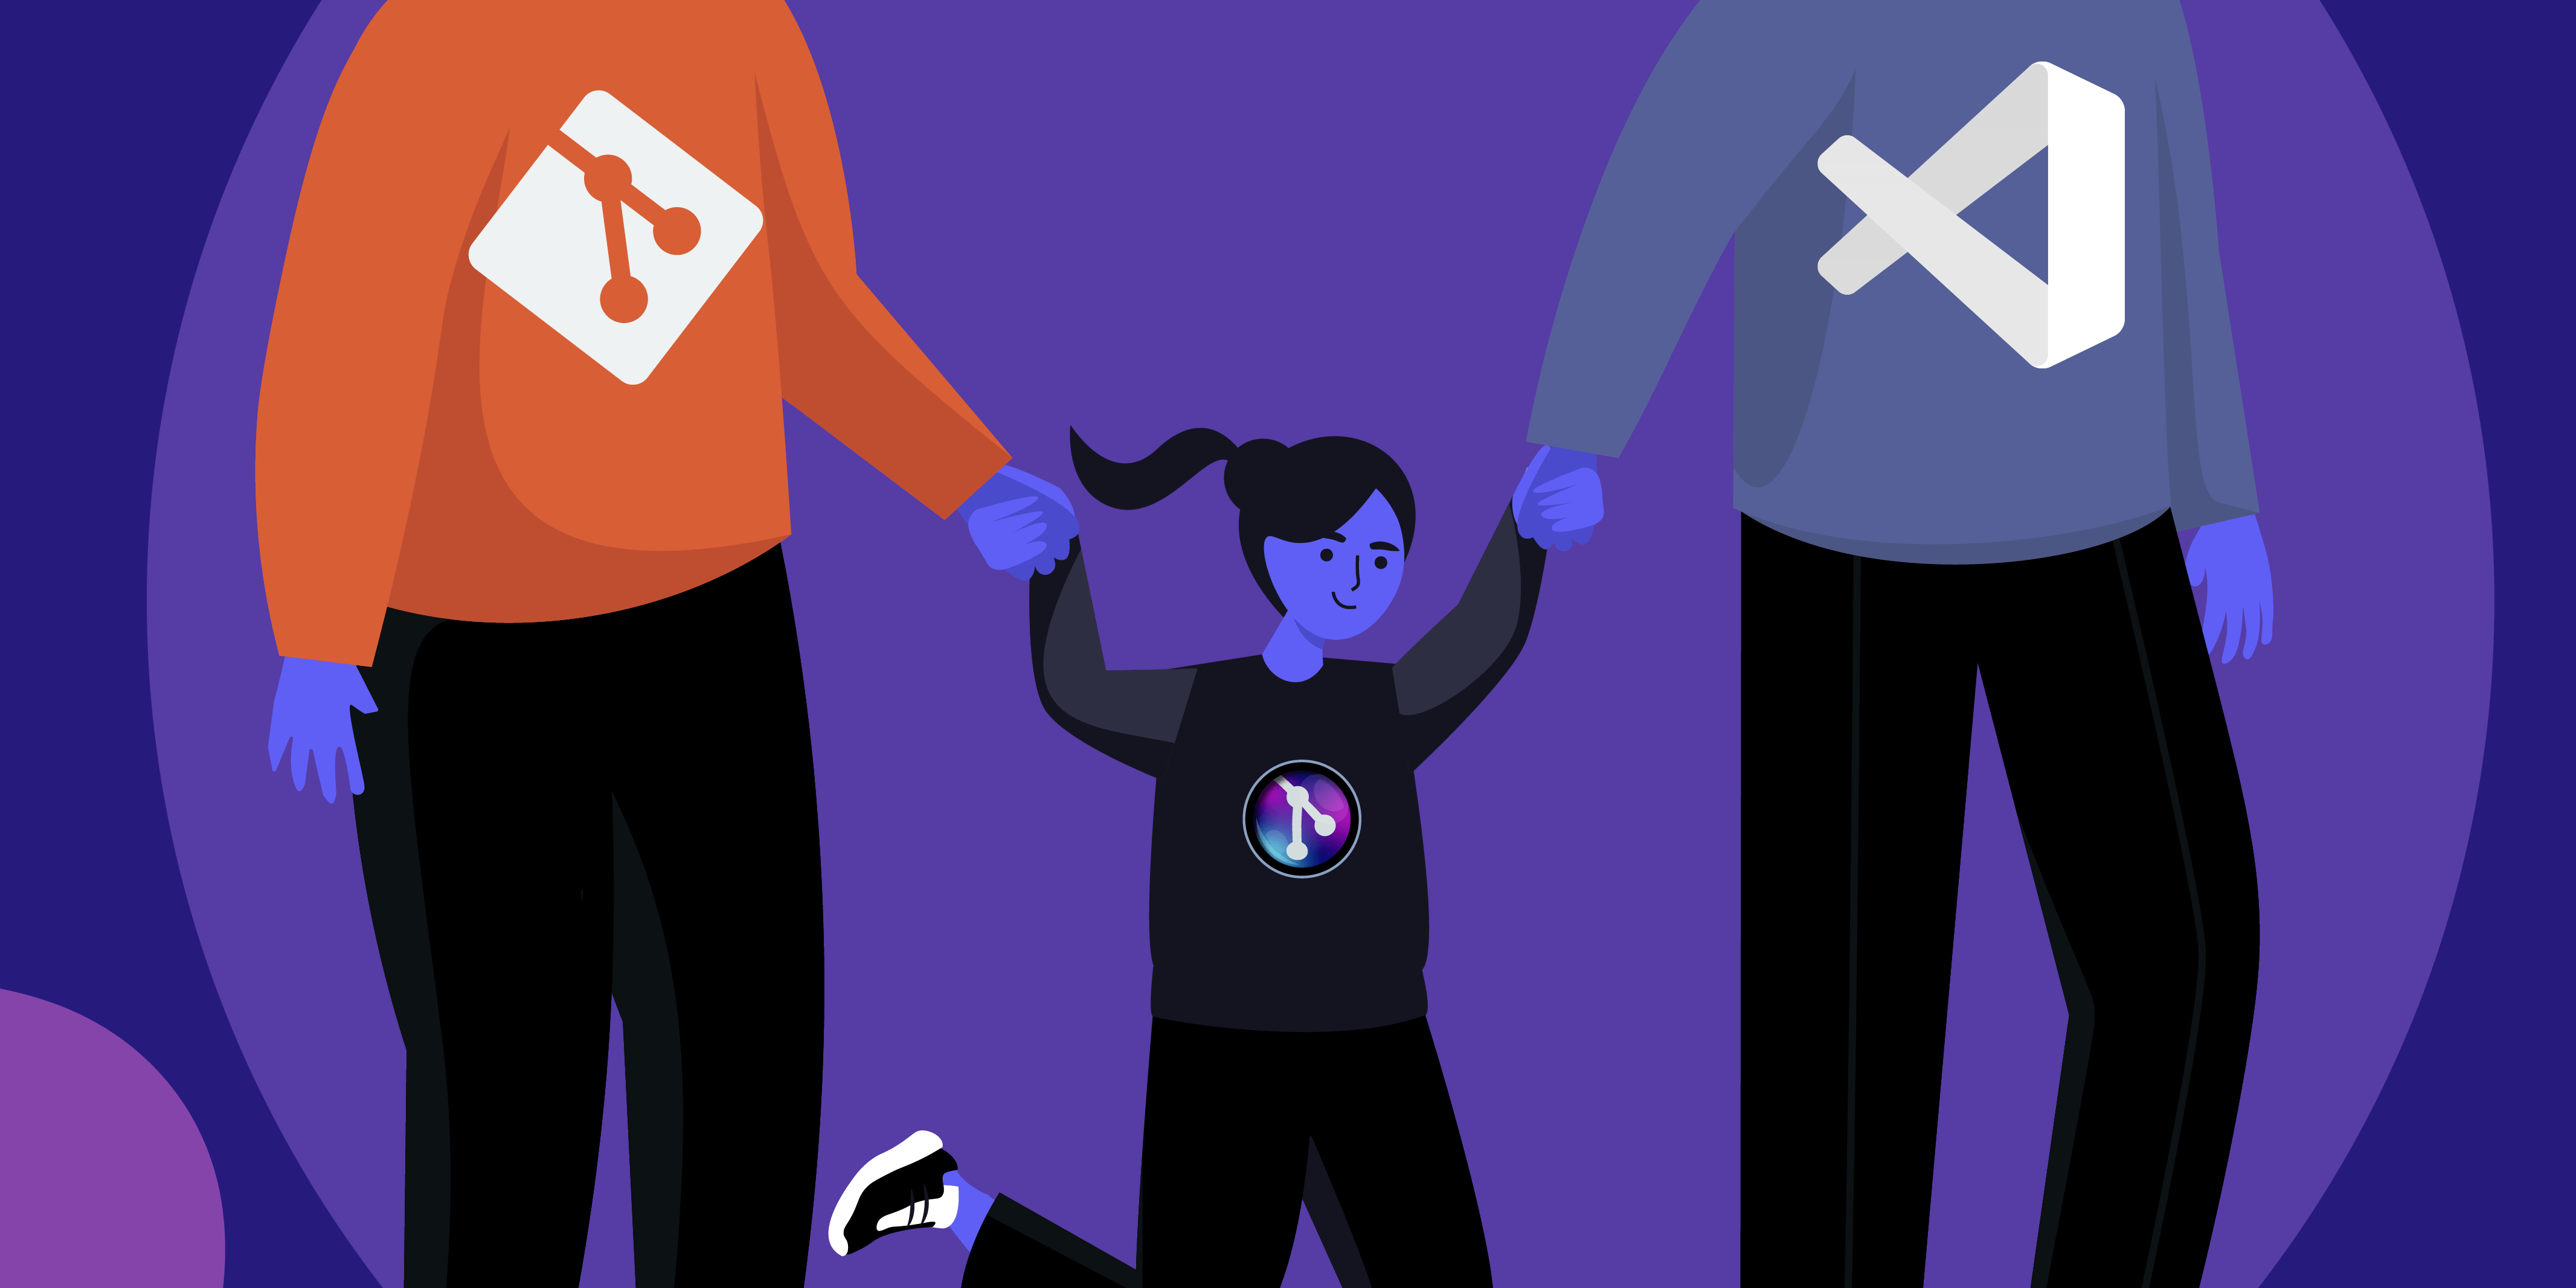 Child with a GitLens shirt on holding hands with 2 adults wearing a Git shirt and a VS Code shirt.